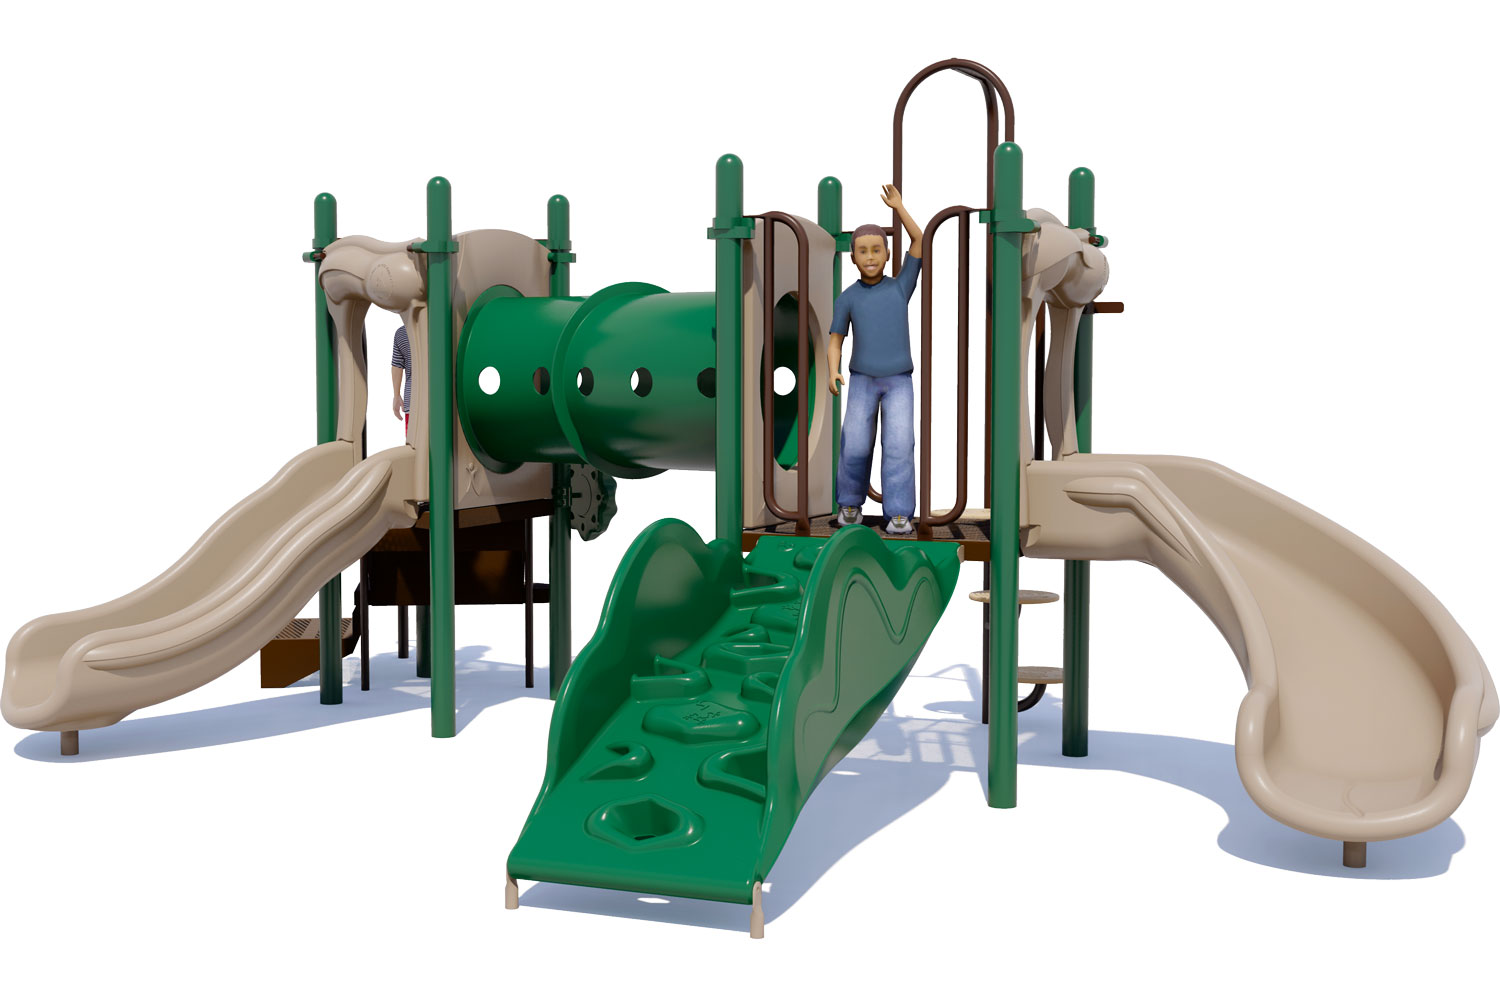 Holiday Hill commercial playground equipment